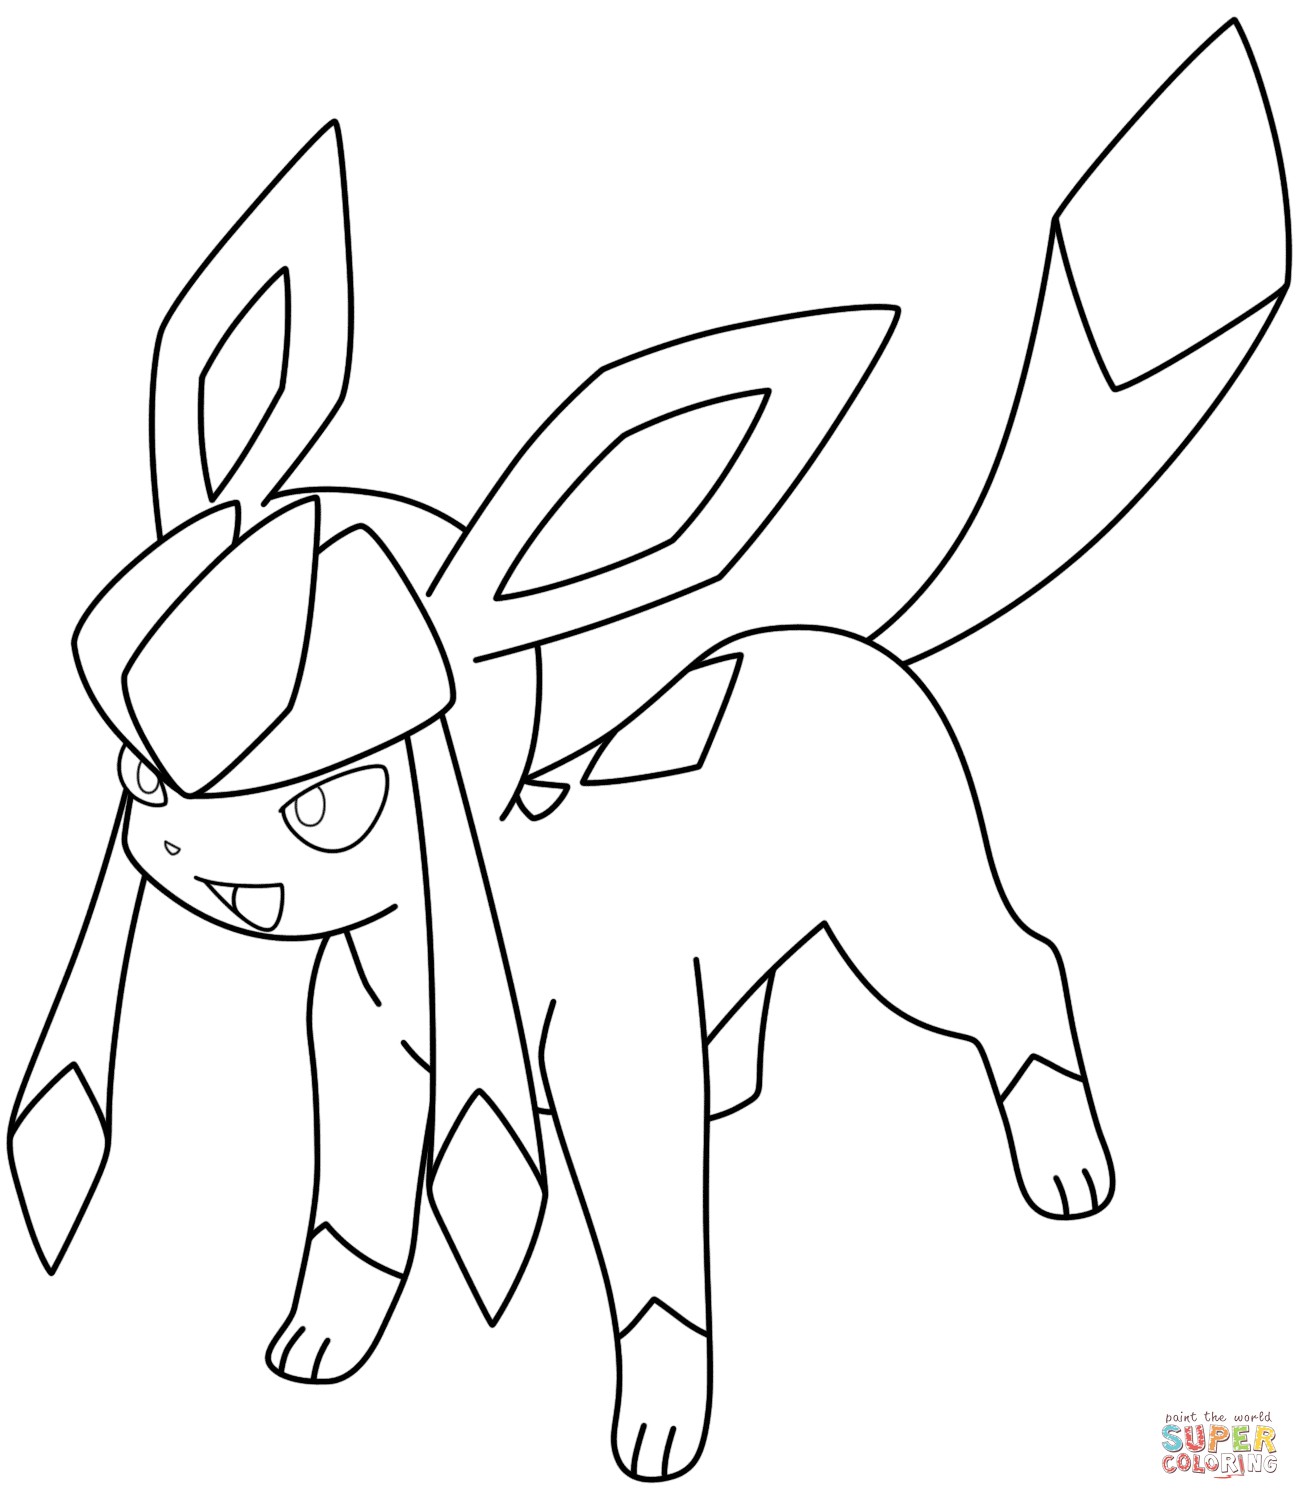 pokemon coloring pages eevee evolutions glaceon beautiful glaceon pokemon coloring page pokemon pinterest of pokemon coloring pages eevee evolutions glaceon